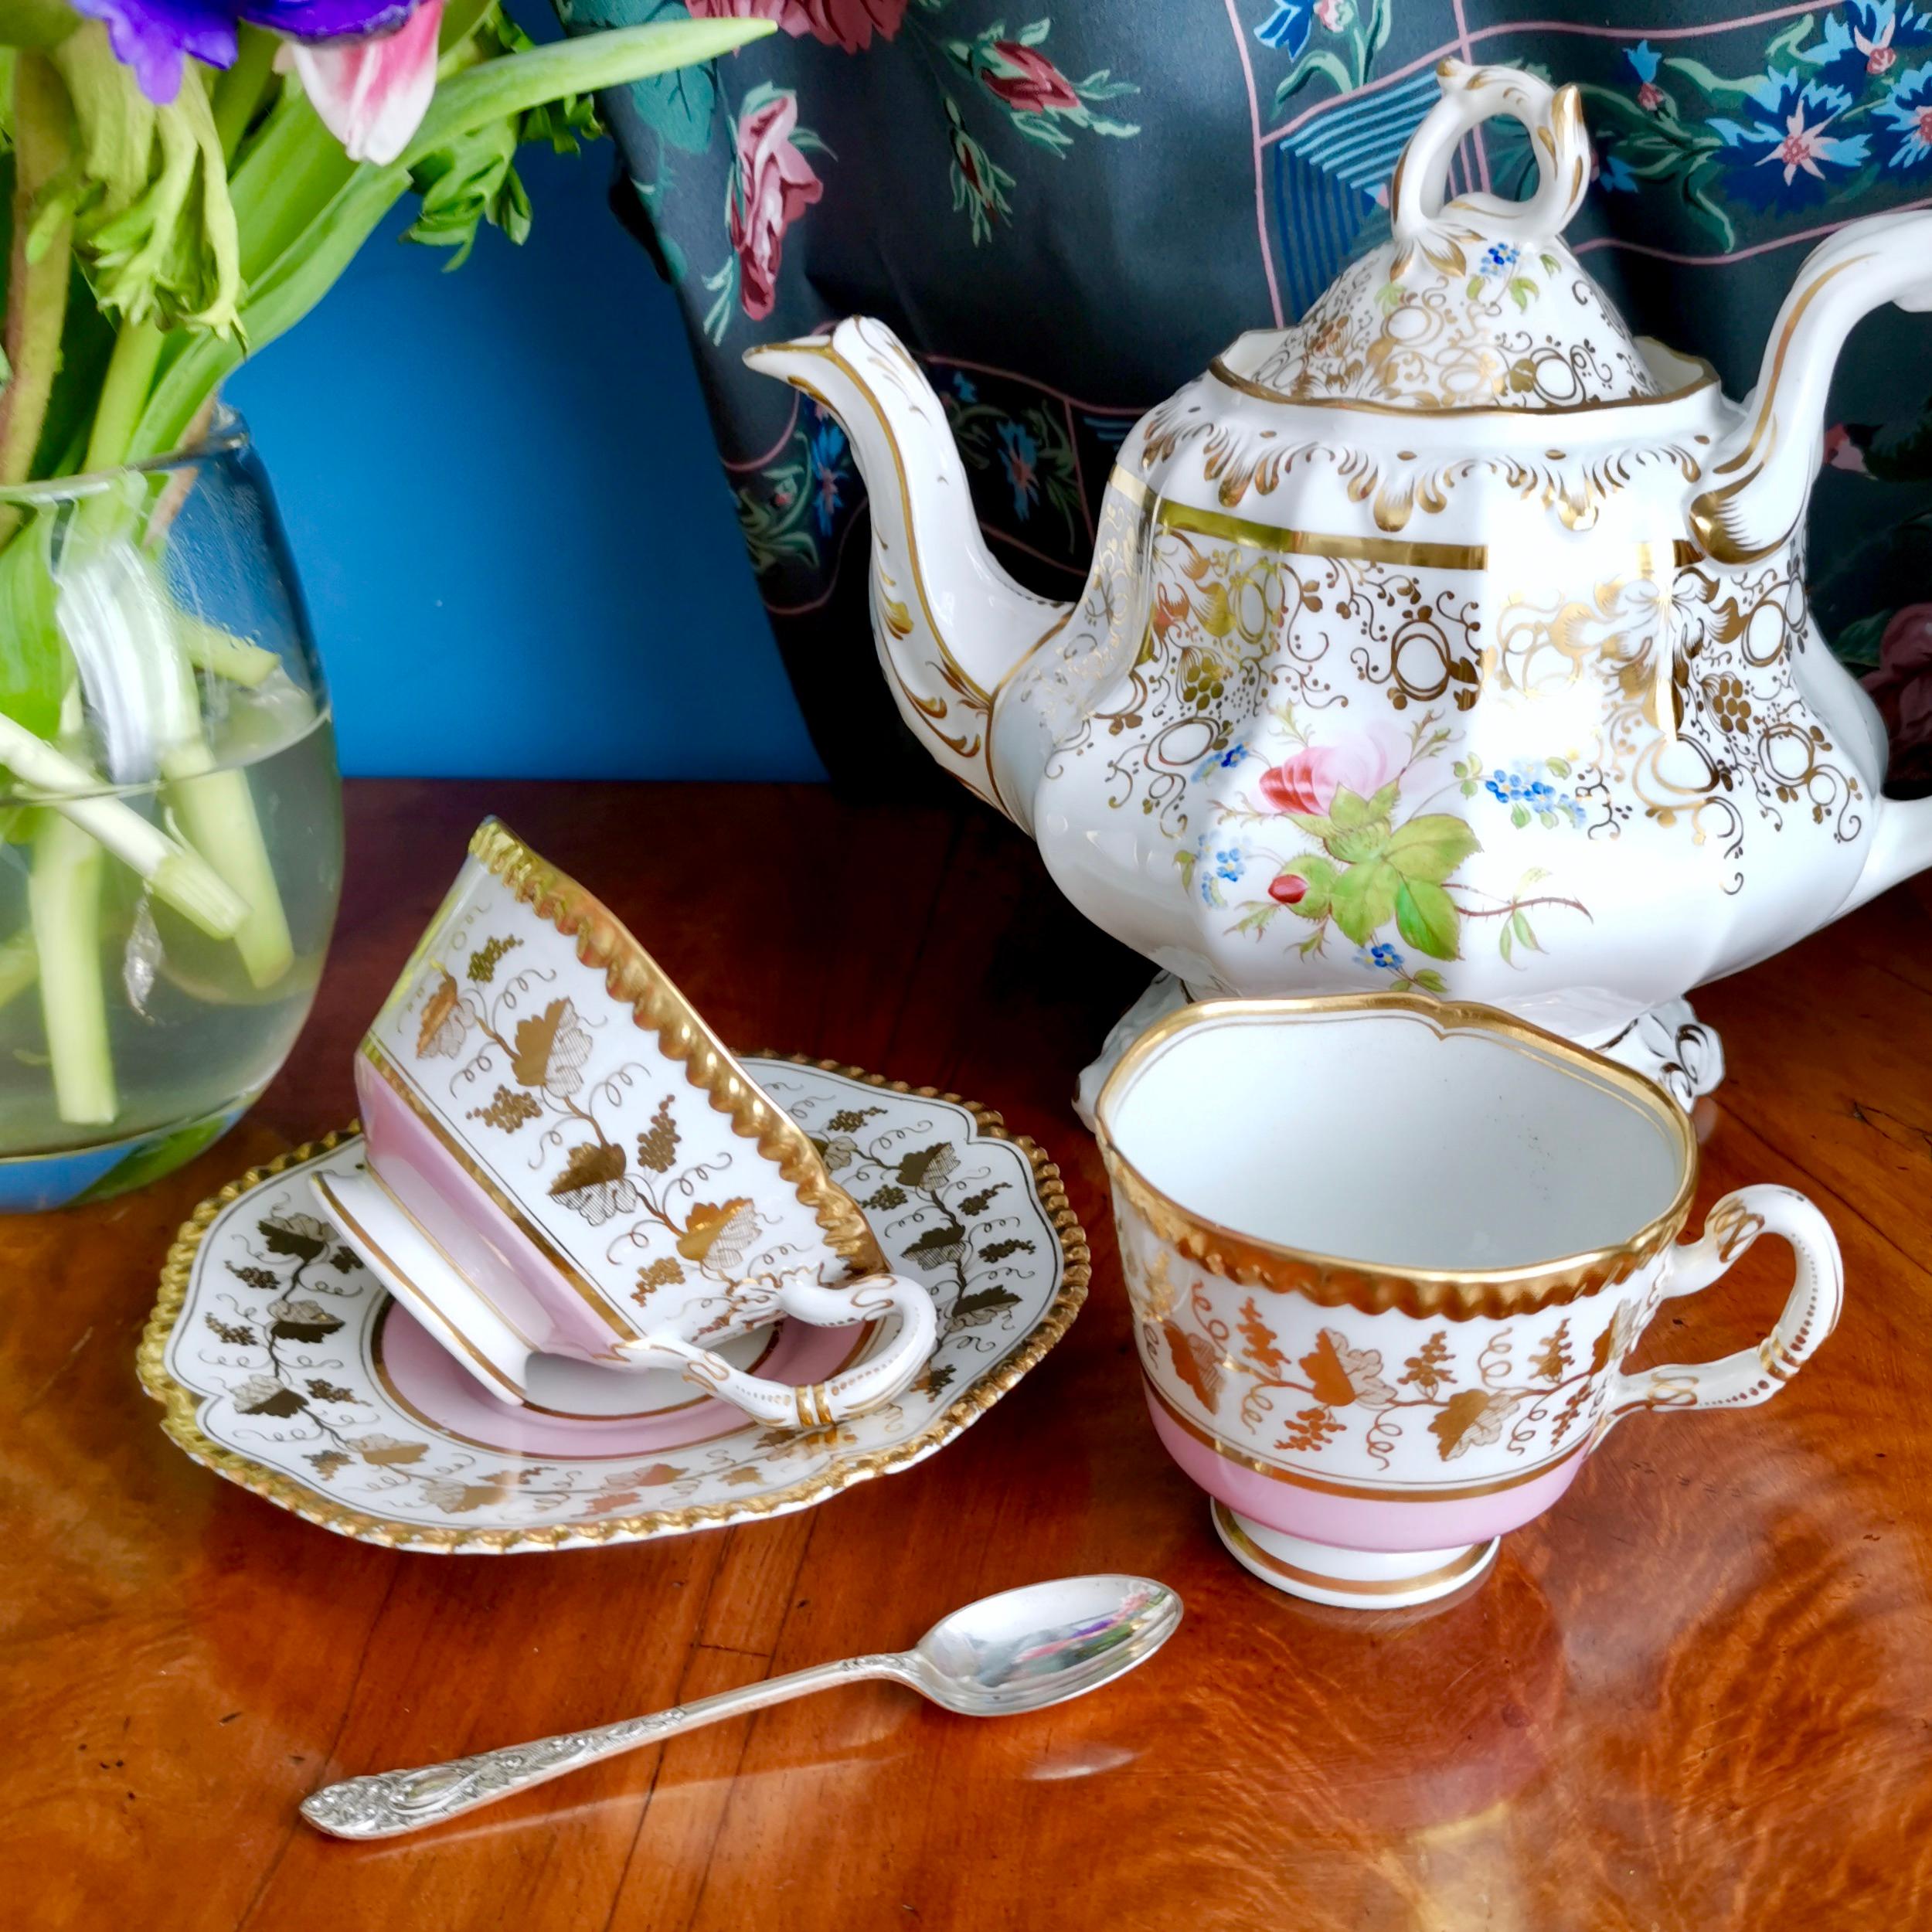 This is a beautiful trio produced by Flight Barr & Barr between 1815 and 1820. The trio consists a teacup, a coffee cup and a saucer. This is how teacups were sold in the early 19th century, as you would never drink tea and coffee at the same time,